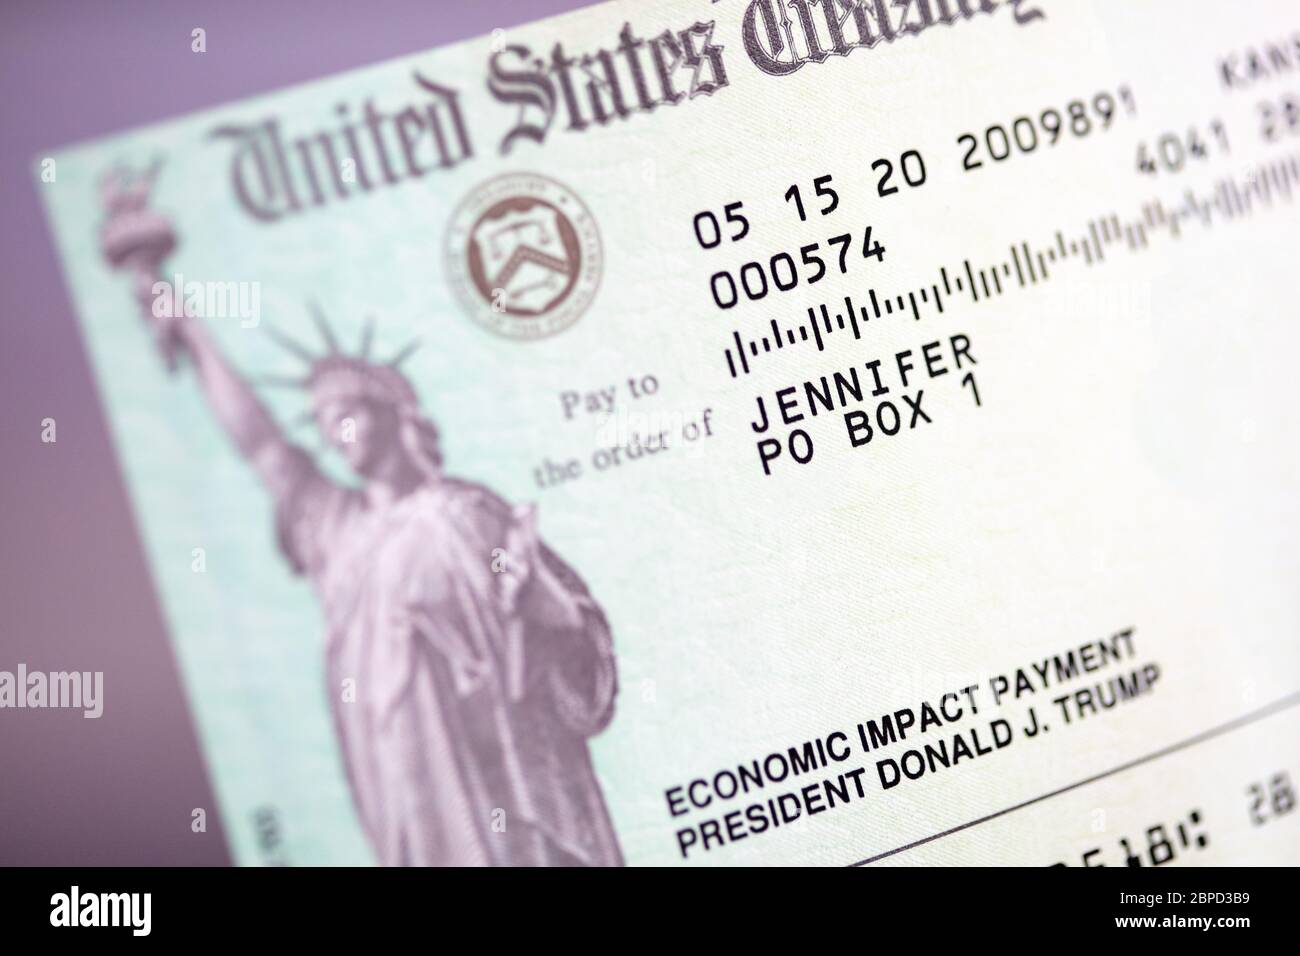 Economic Impact Payment Check in the United States Stock Photo